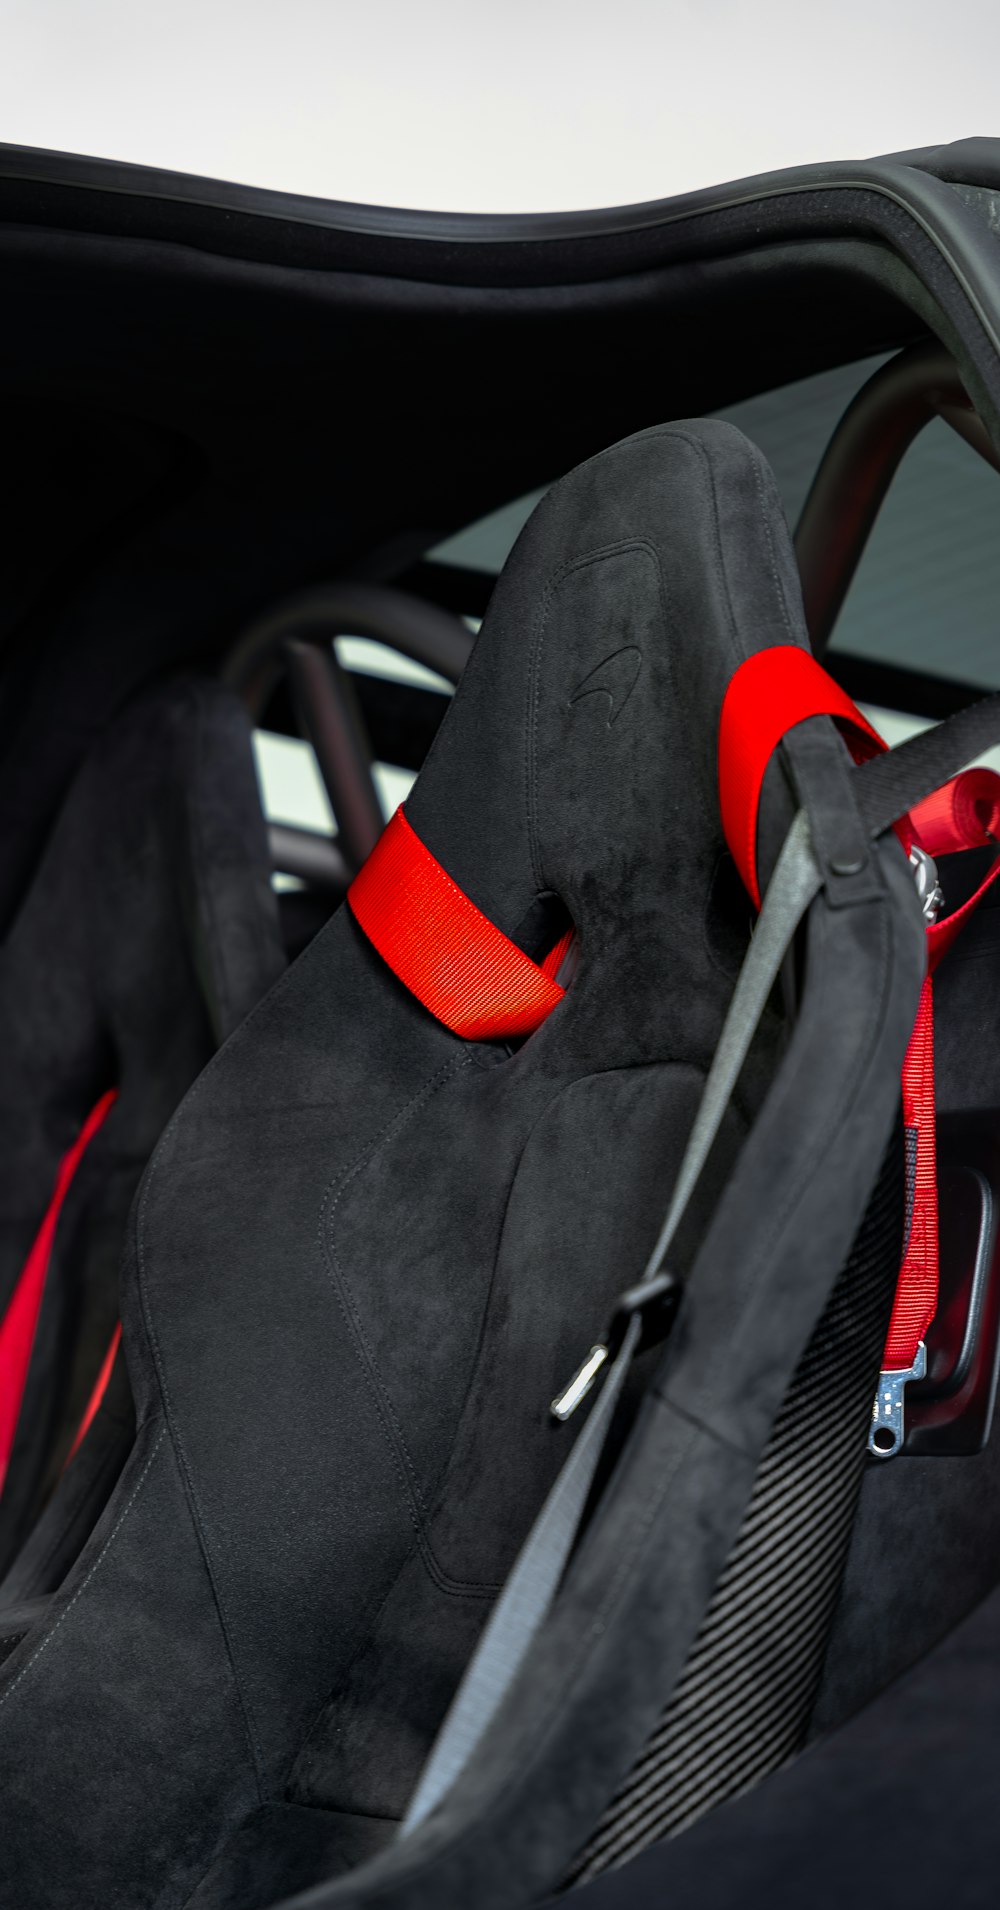 the interior of a sports car with a red seat belt